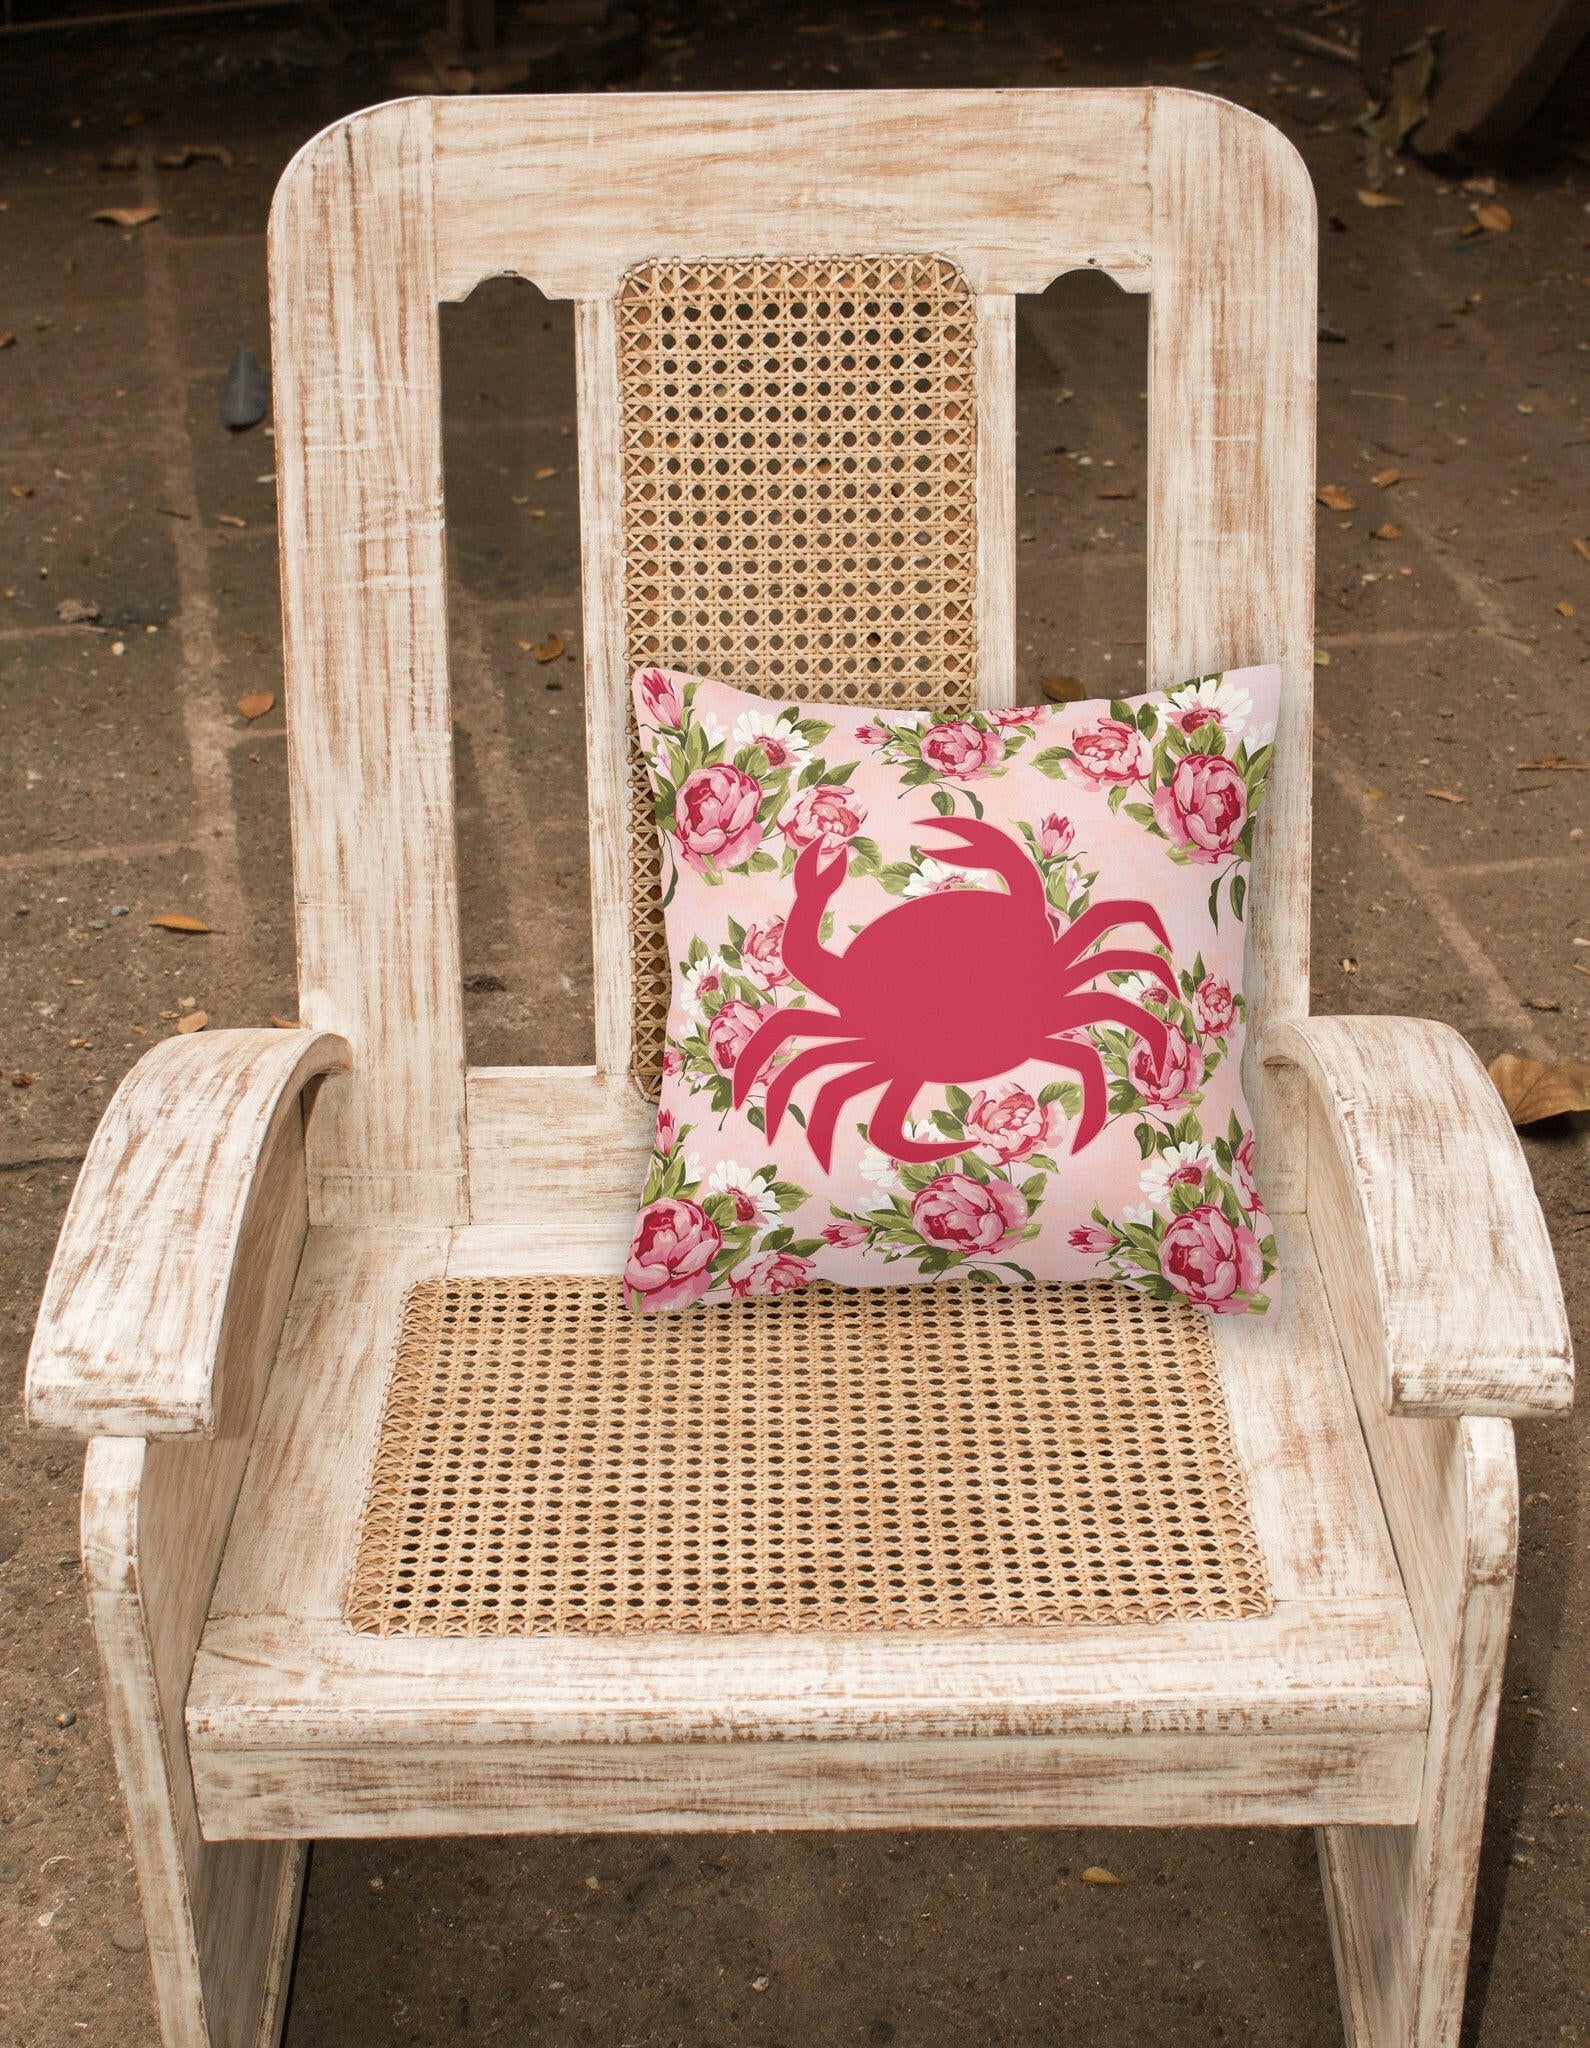 Crab Shabby Chic Pink Roses  Fabric Decorative Pillow BB1024-RS-PK-PW1414 - the-store.com